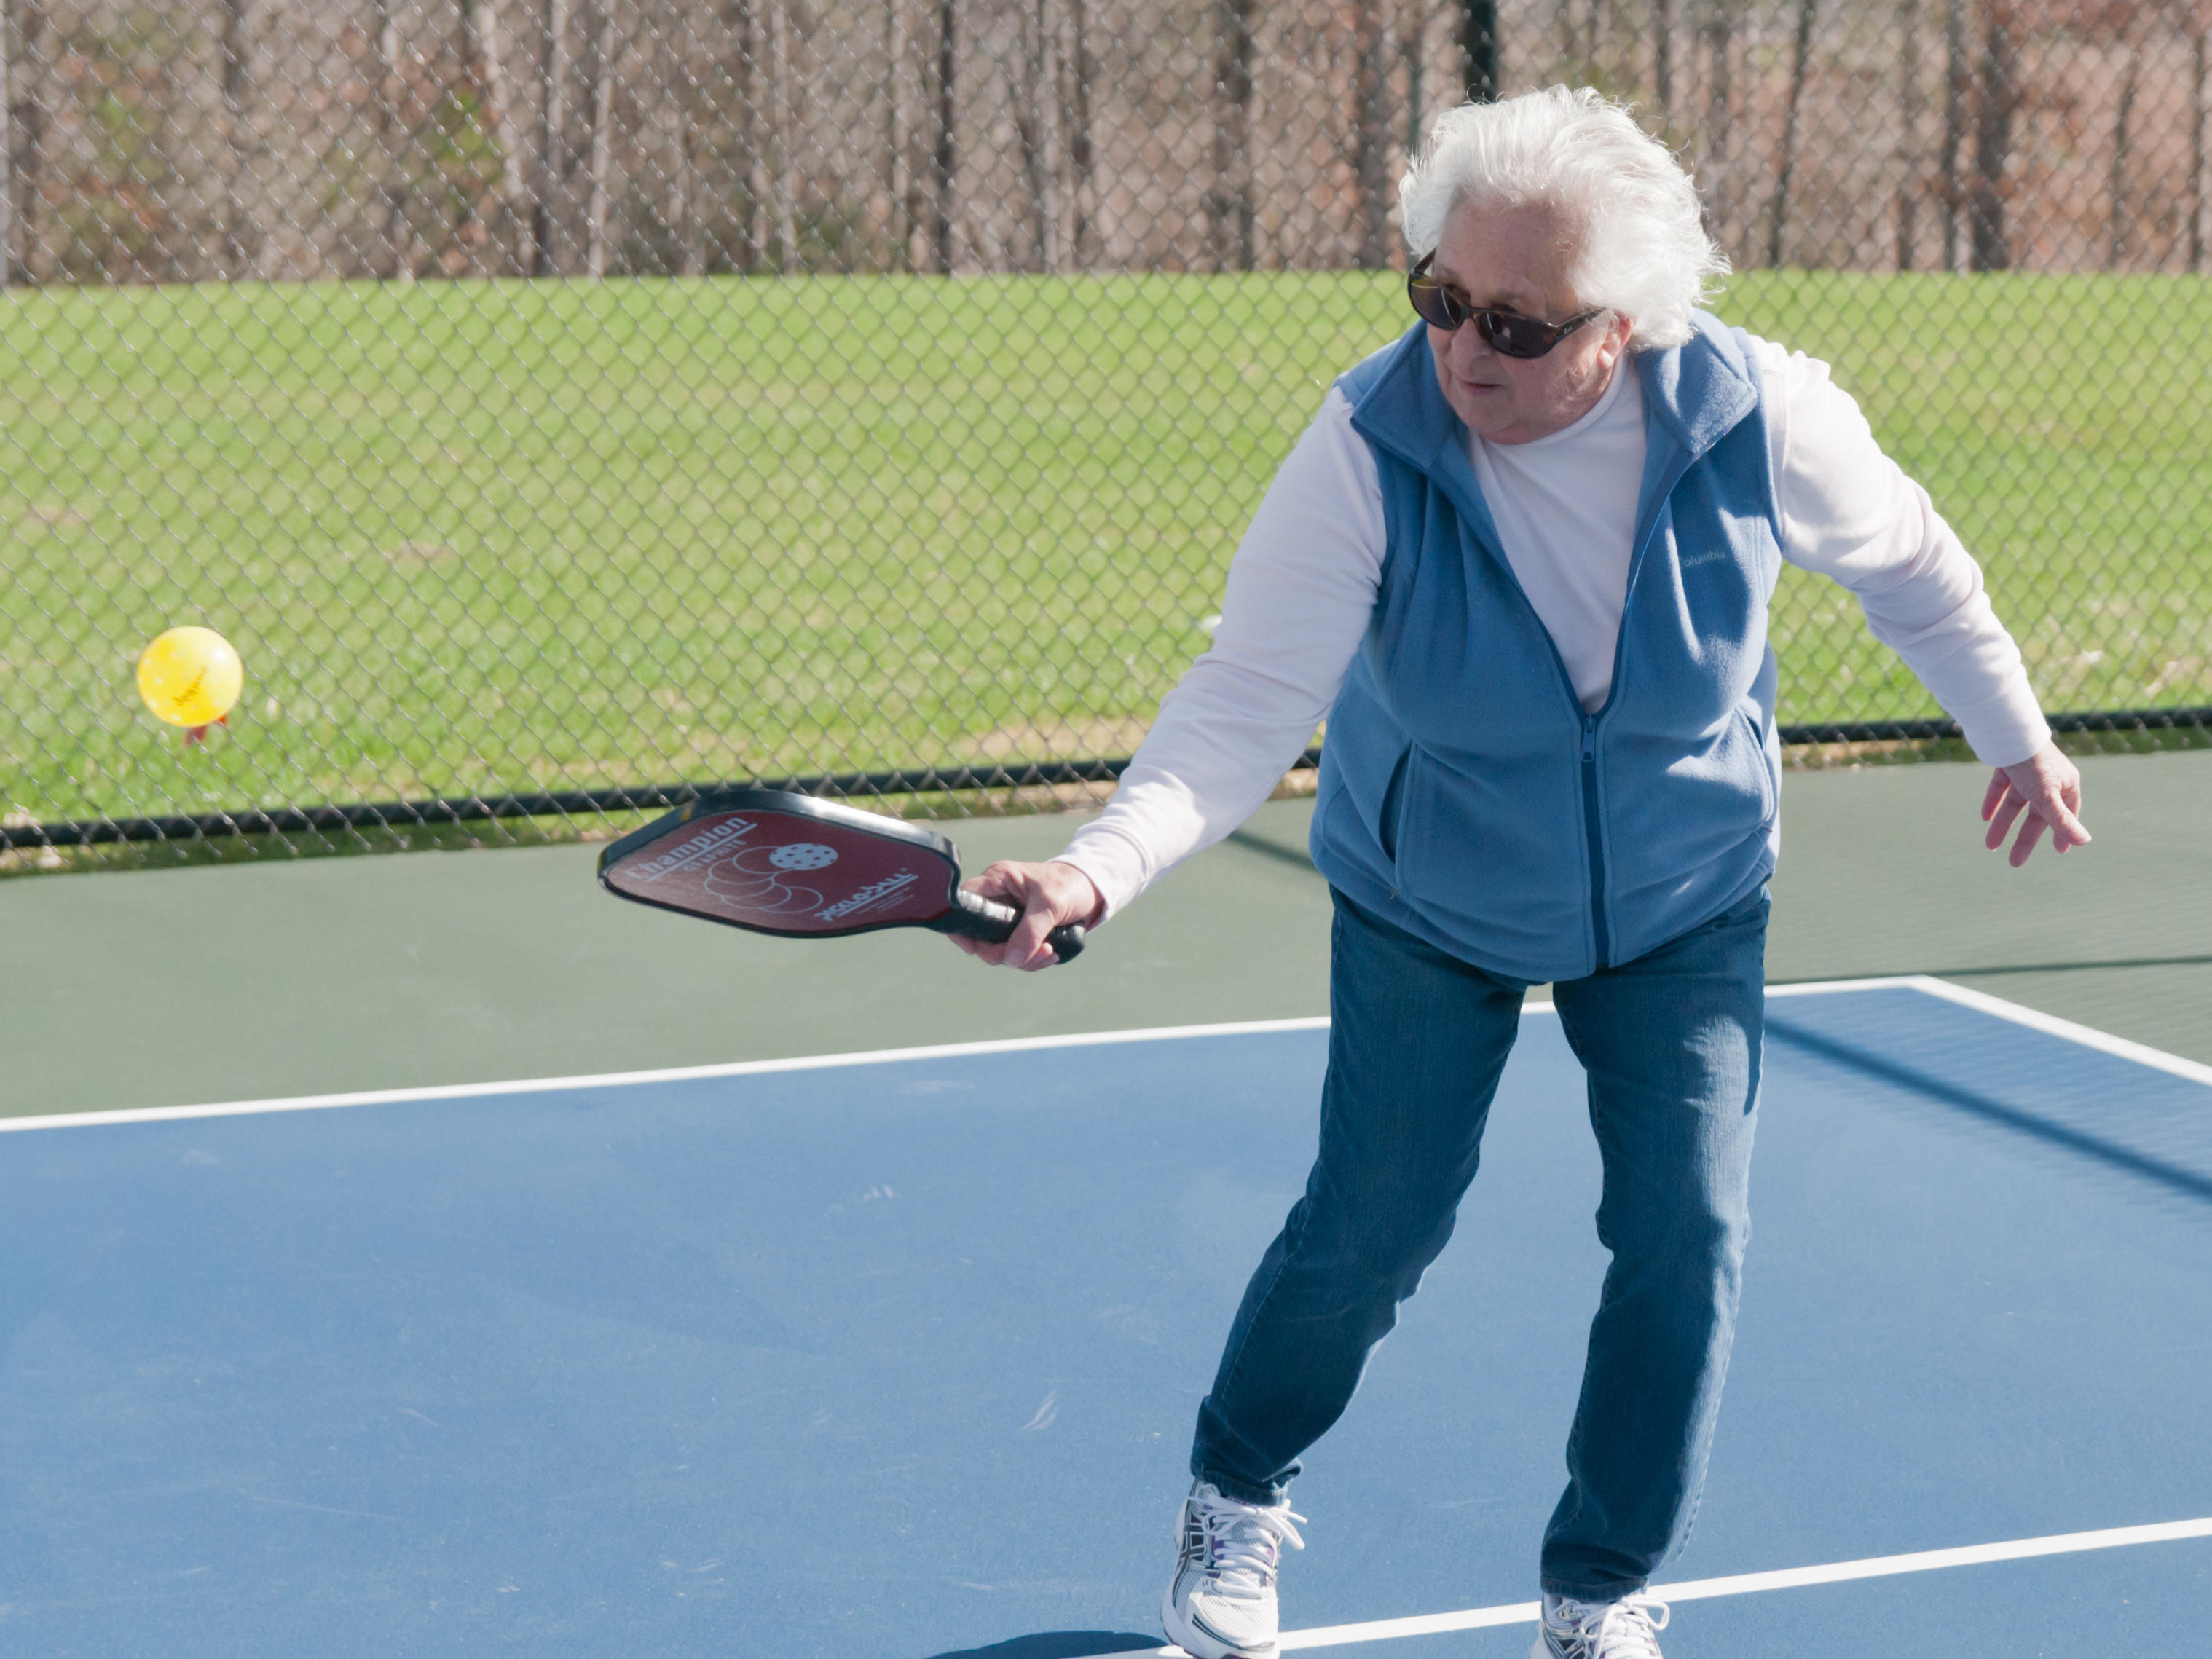 Leisure activities may improve longevity for older adults